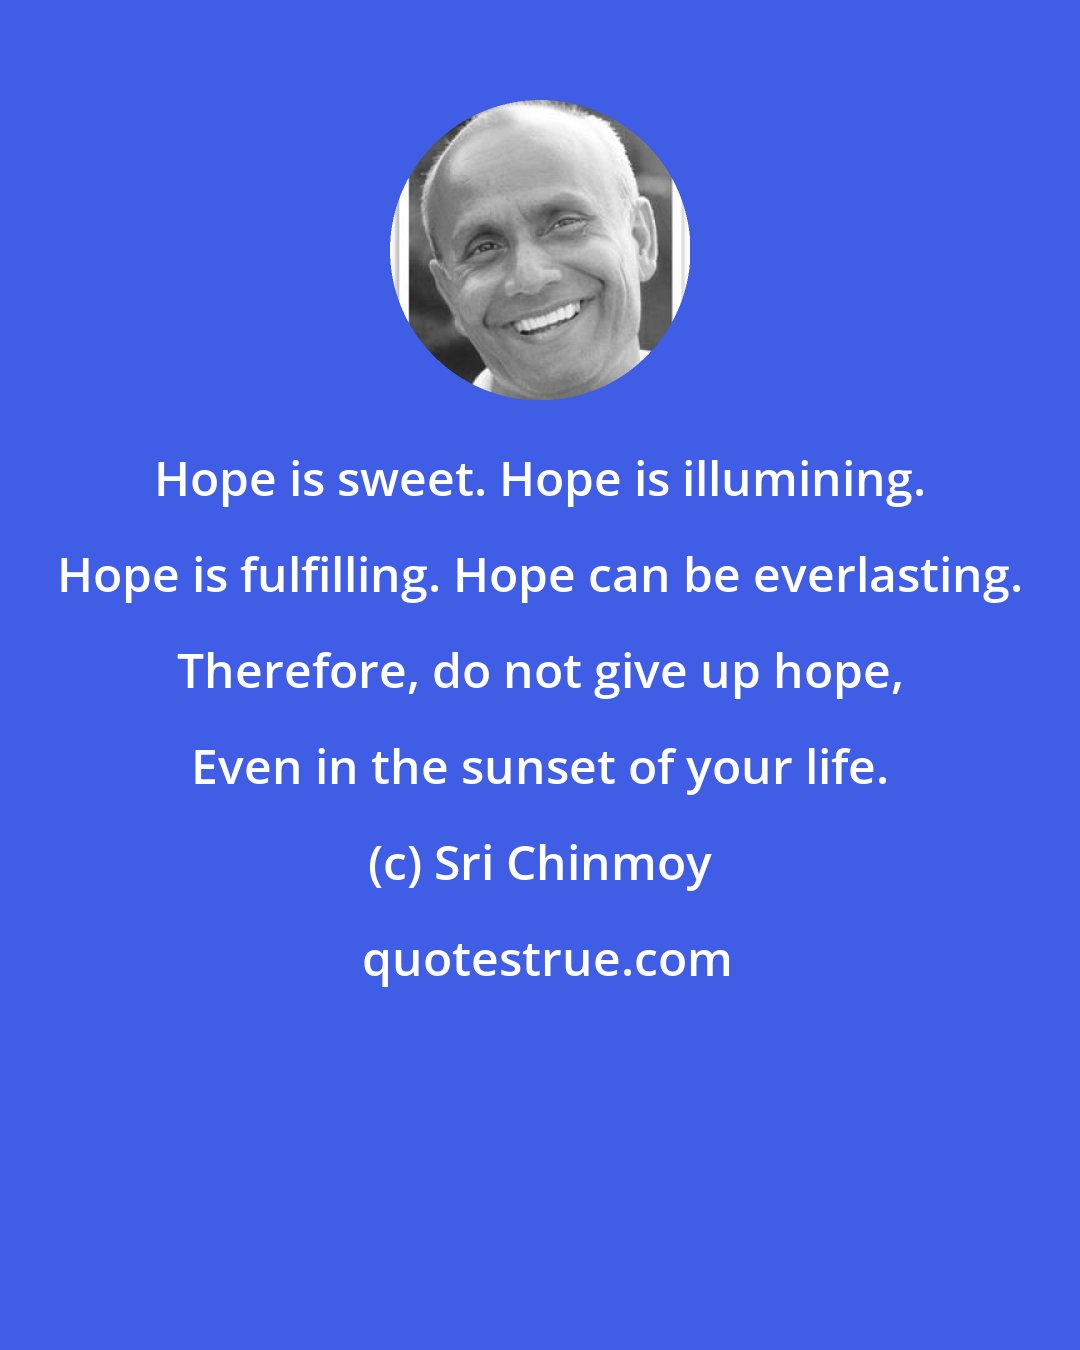 Sri Chinmoy: Hope is sweet. Hope is illumining. Hope is fulfilling. Hope can be everlasting. Therefore, do not give up hope, Even in the sunset of your life.